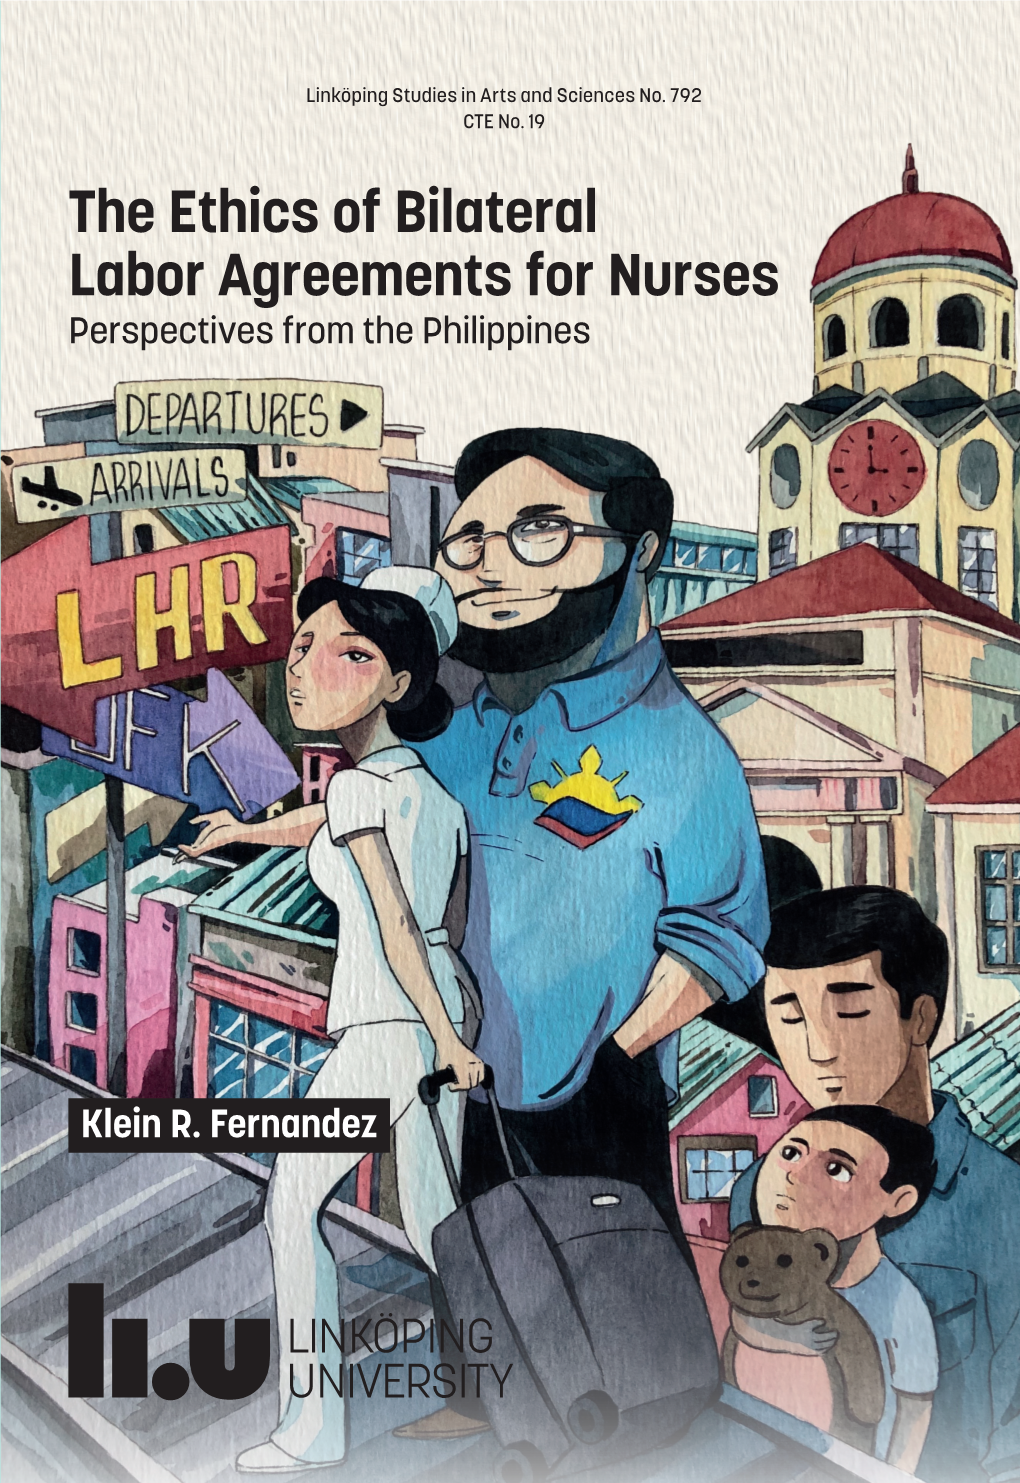 The Ethics of Bilateral Labor Agreements for Nurses